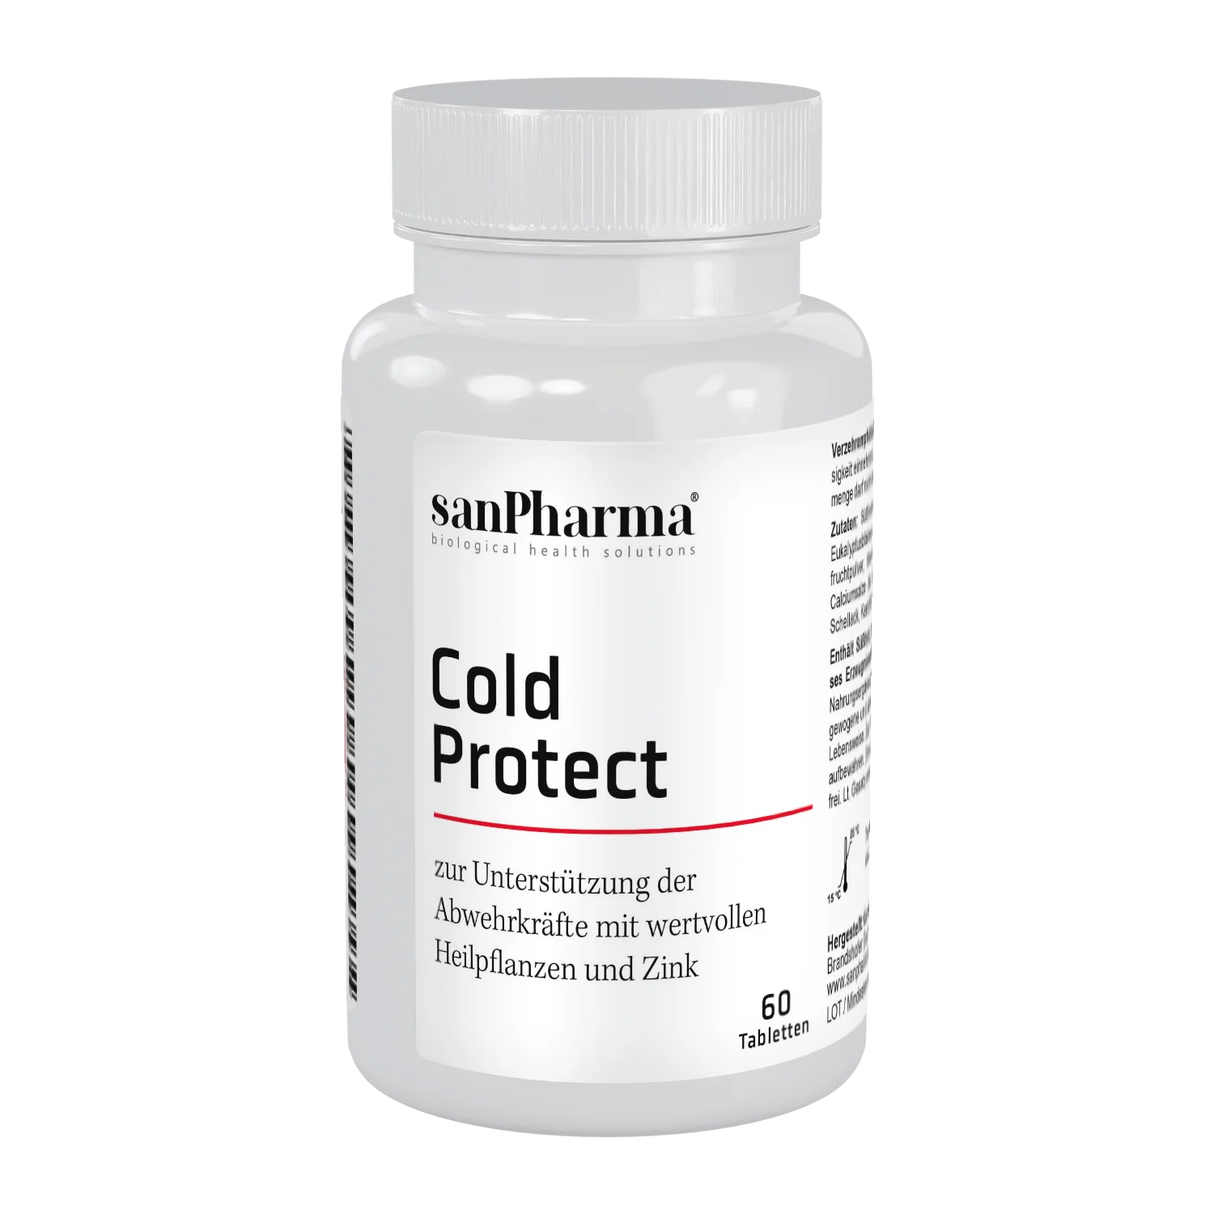 Cold Protect